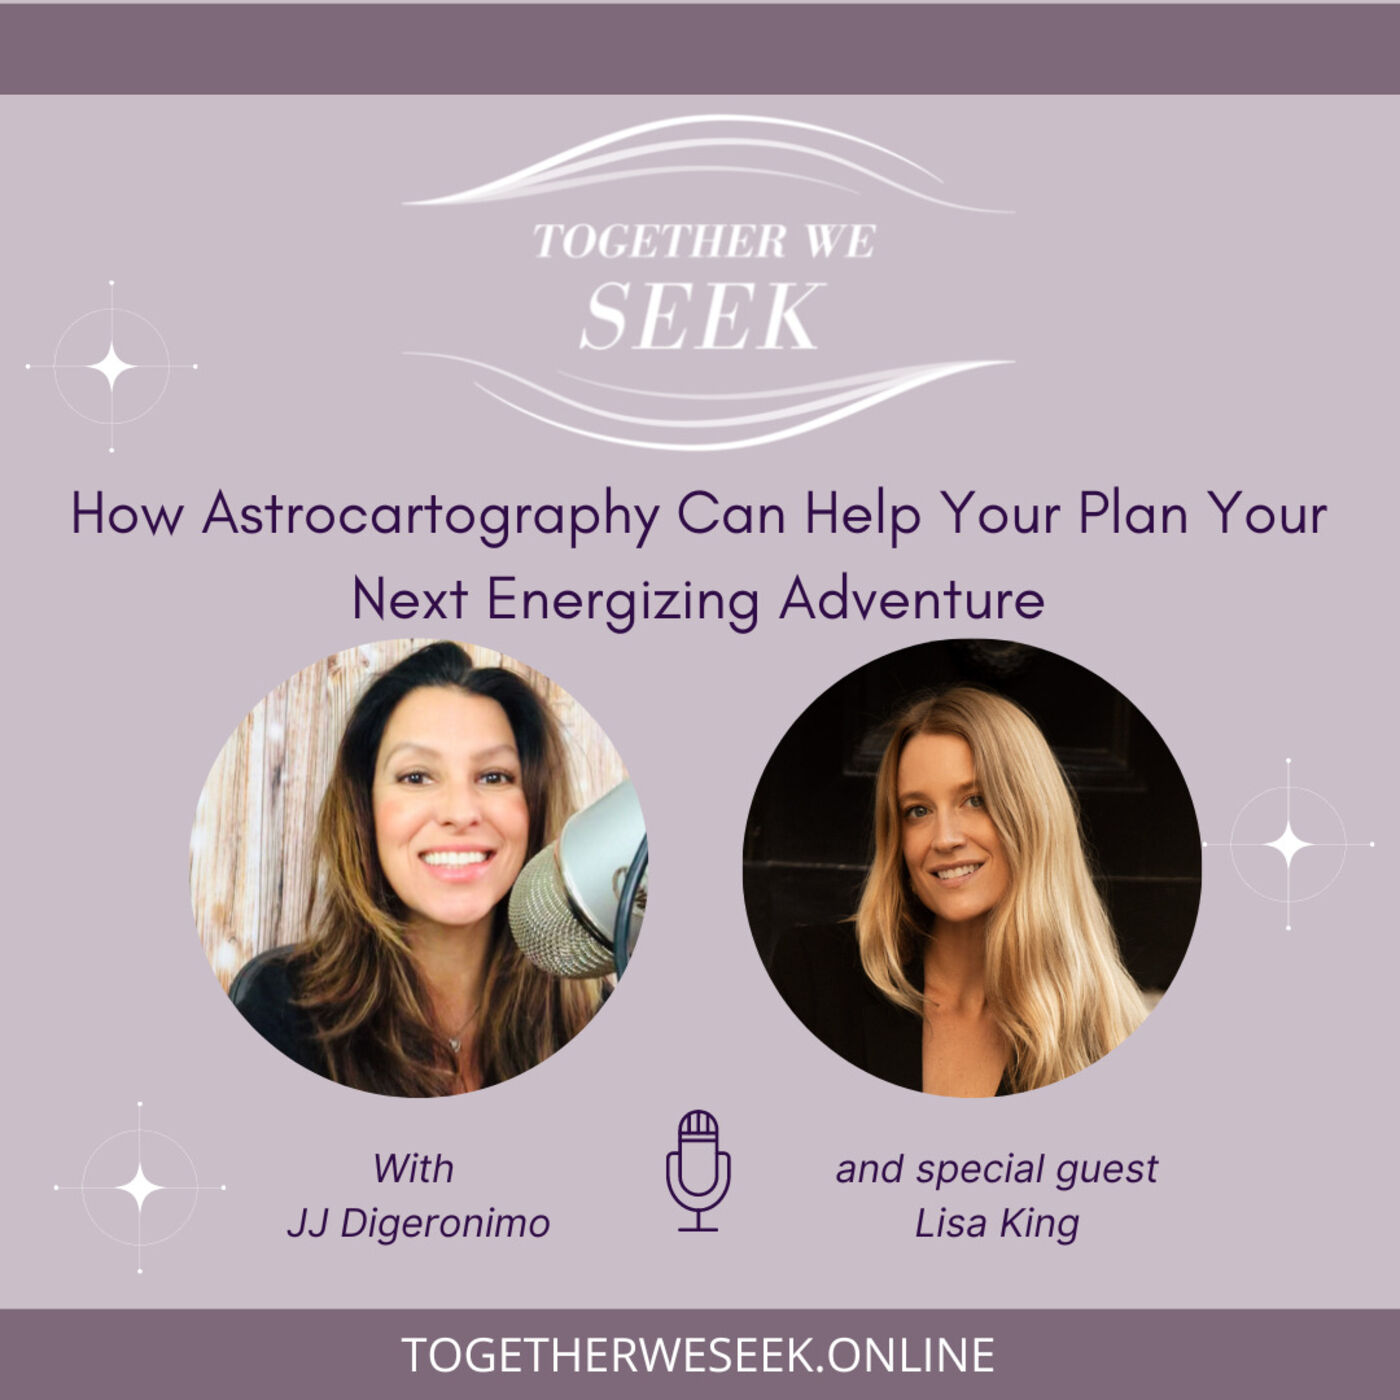 How Astrocartography Can Help Your Plan Your Next Energizing Adventure with Natalie